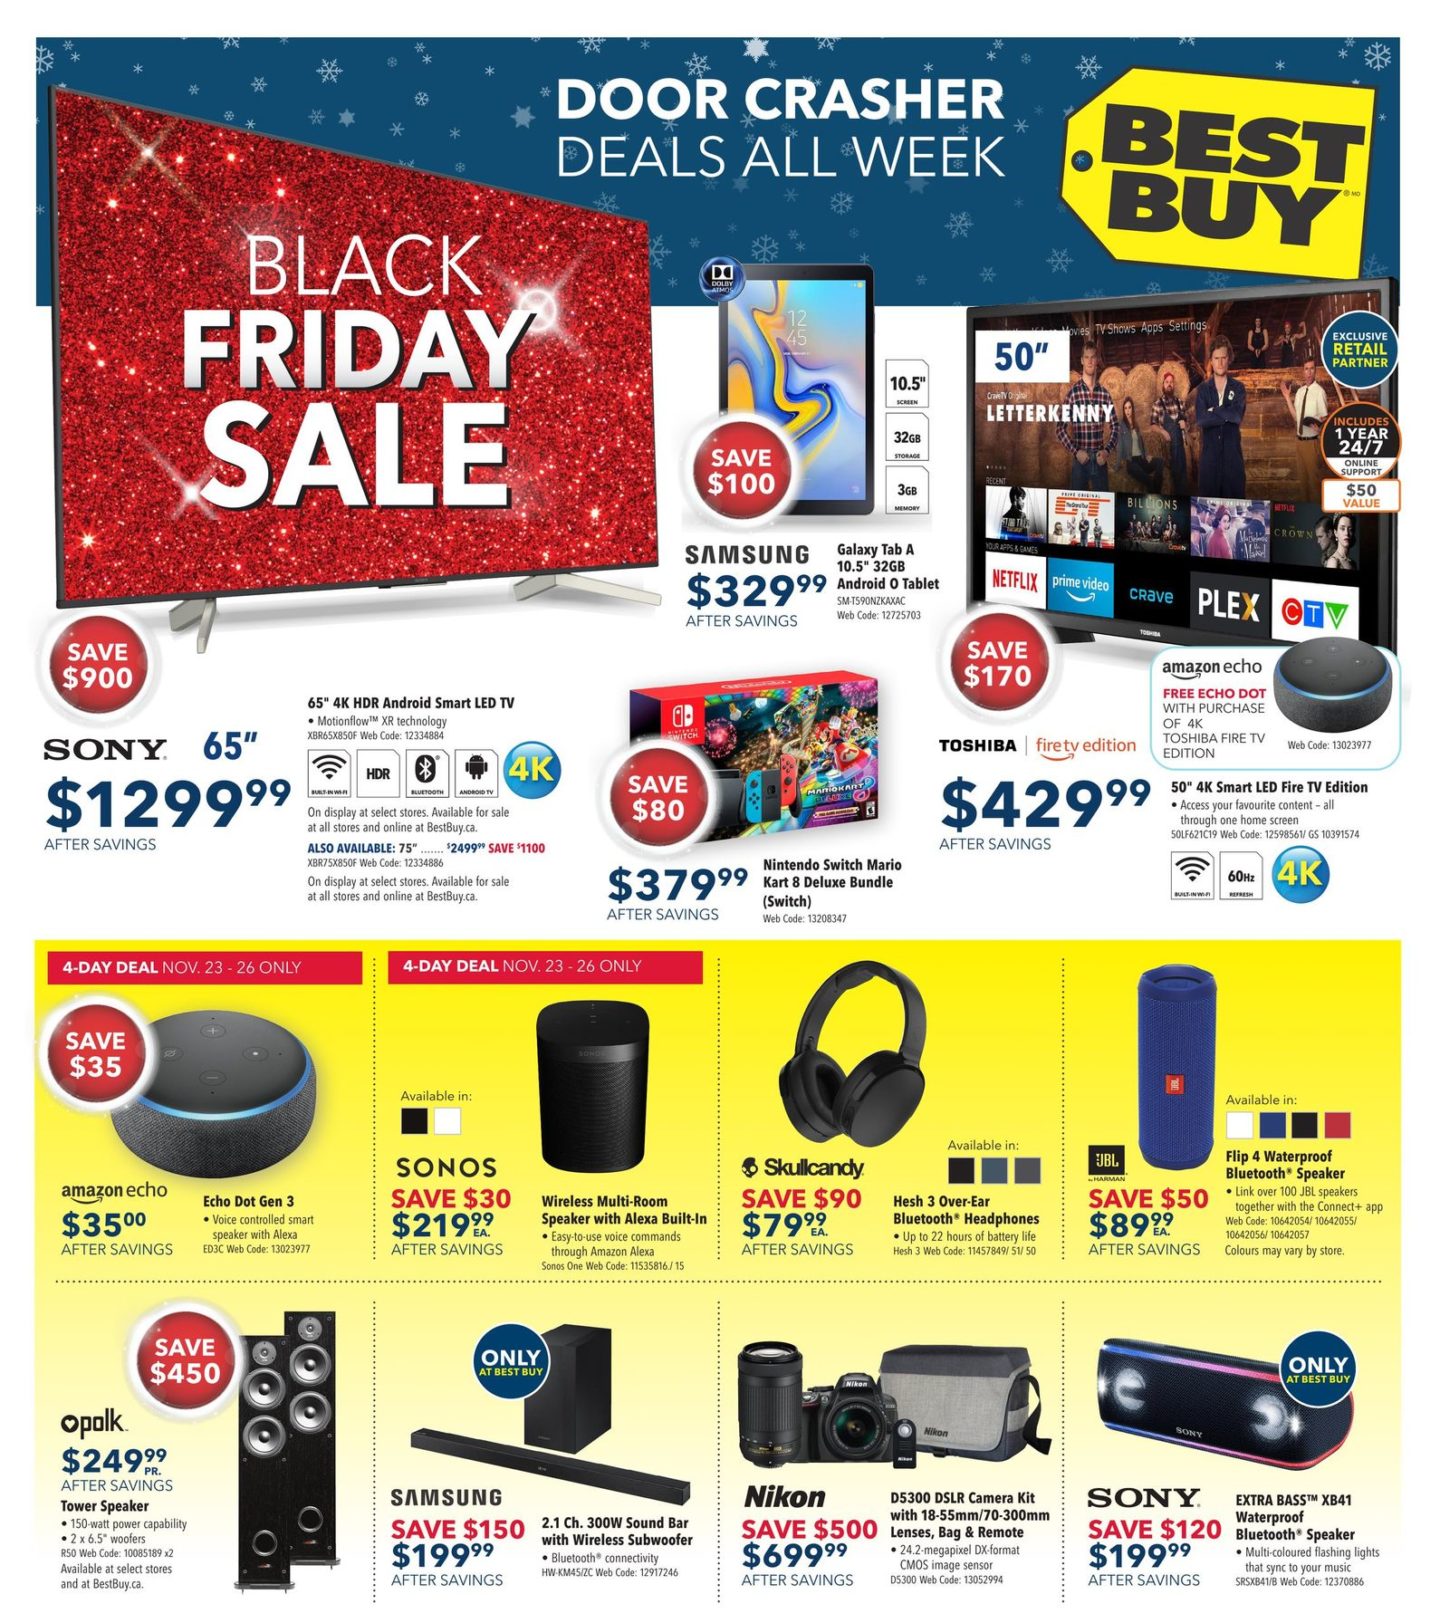 Best Buy Black Friday Flyer Deals 2019 Canada - How To Find Best Deals Black Friday